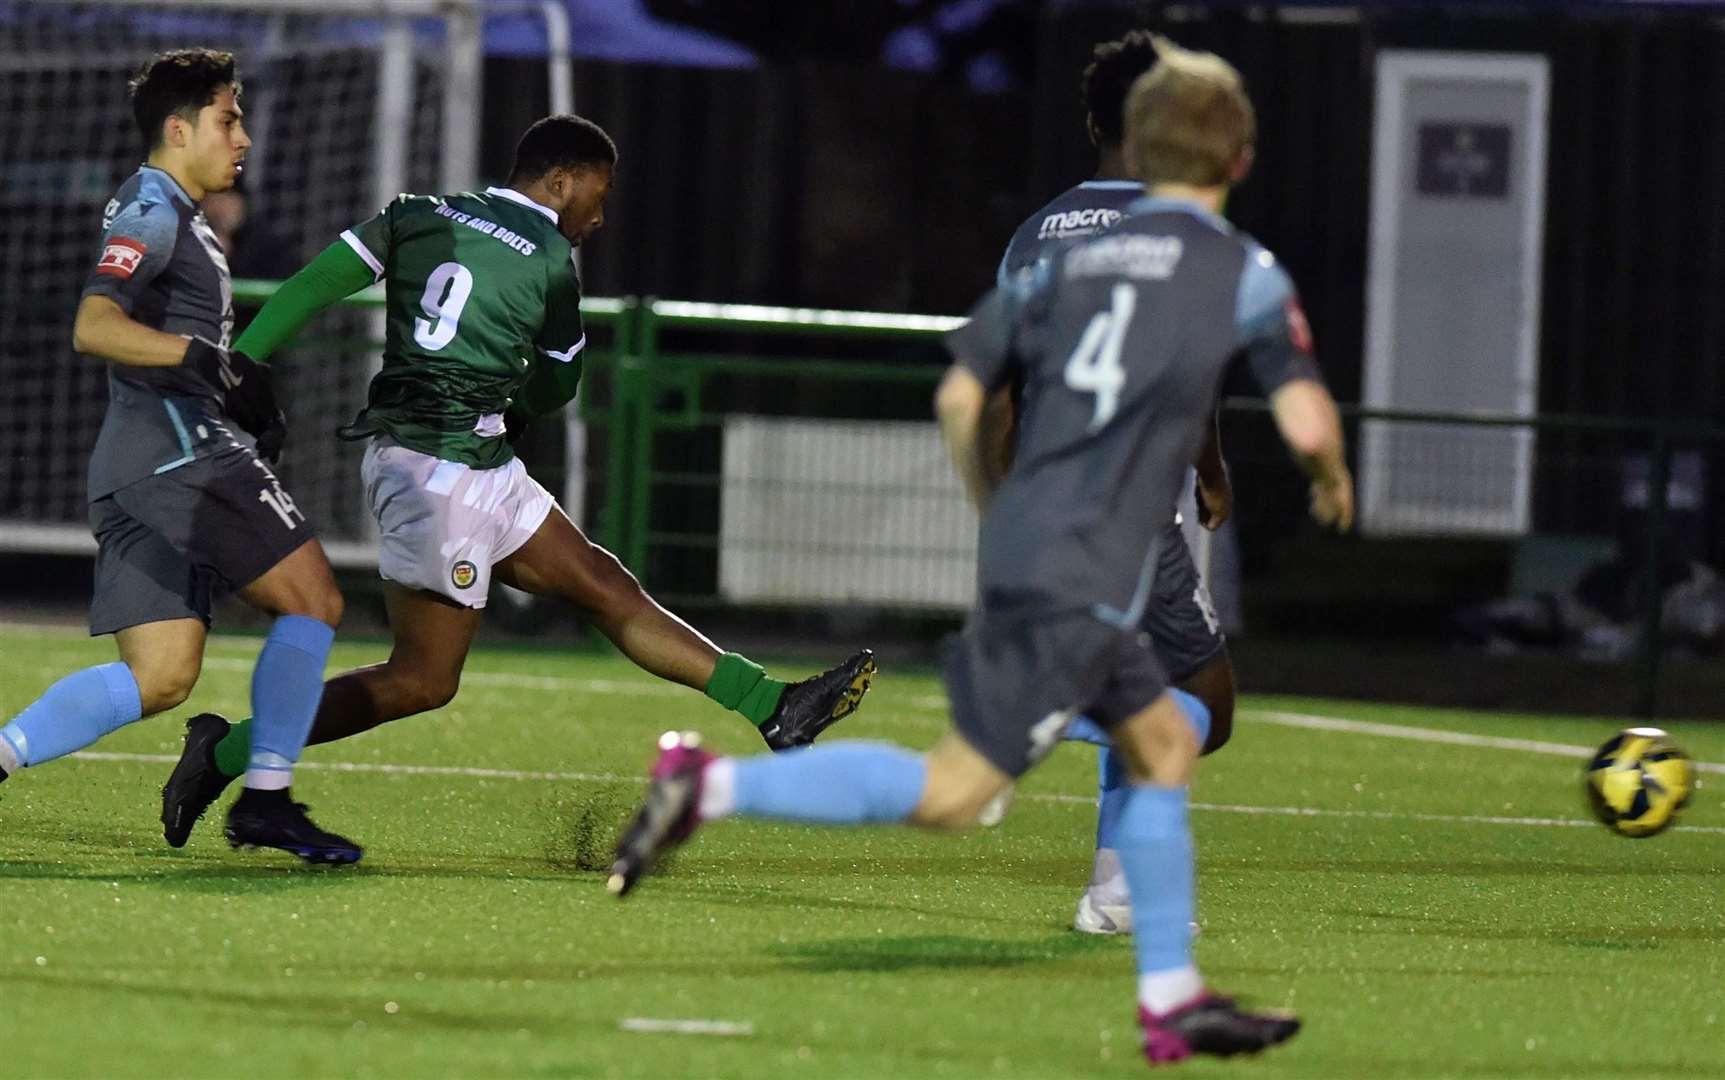 Vance Bola scores Ashford’s equaliser against Three Bridges on Saturday. Picture: Ian Scammell